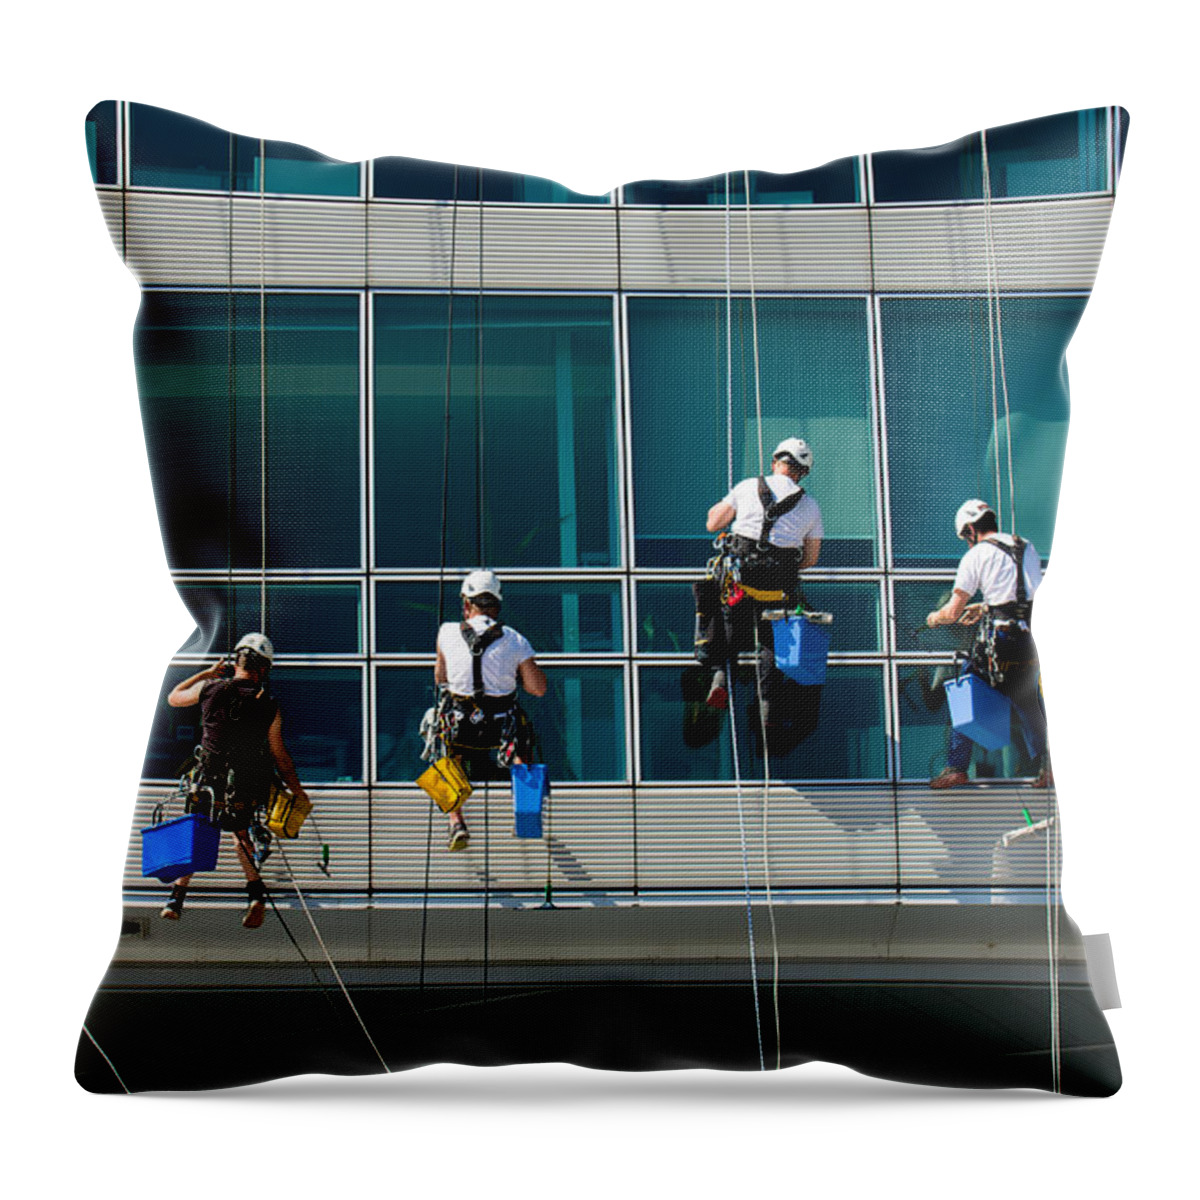 Teamwork Throw Pillow featuring the photograph Teamwork At Service by Andreas Berthold